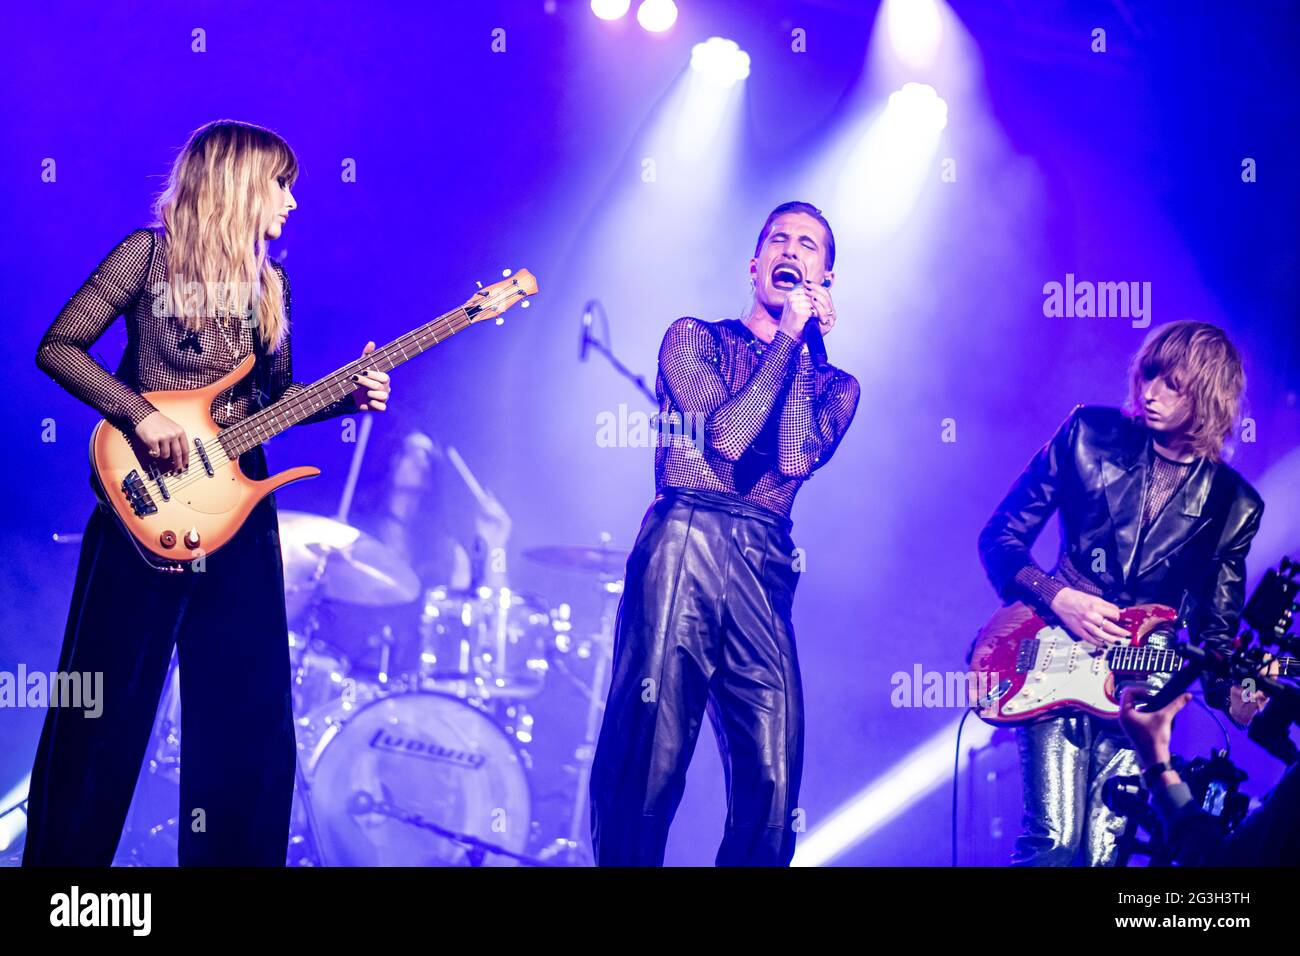 Berlin, Germany. 16th June, 2021. Victoria De Angelis (l-r), Damiano David and Thomas Raggi of the band Maneskin perform a live concert for the video portal TikTok at SchwuZ Queer Club. Credit: Fabian Sommer/dpa/Alamy Live News Stock Photo